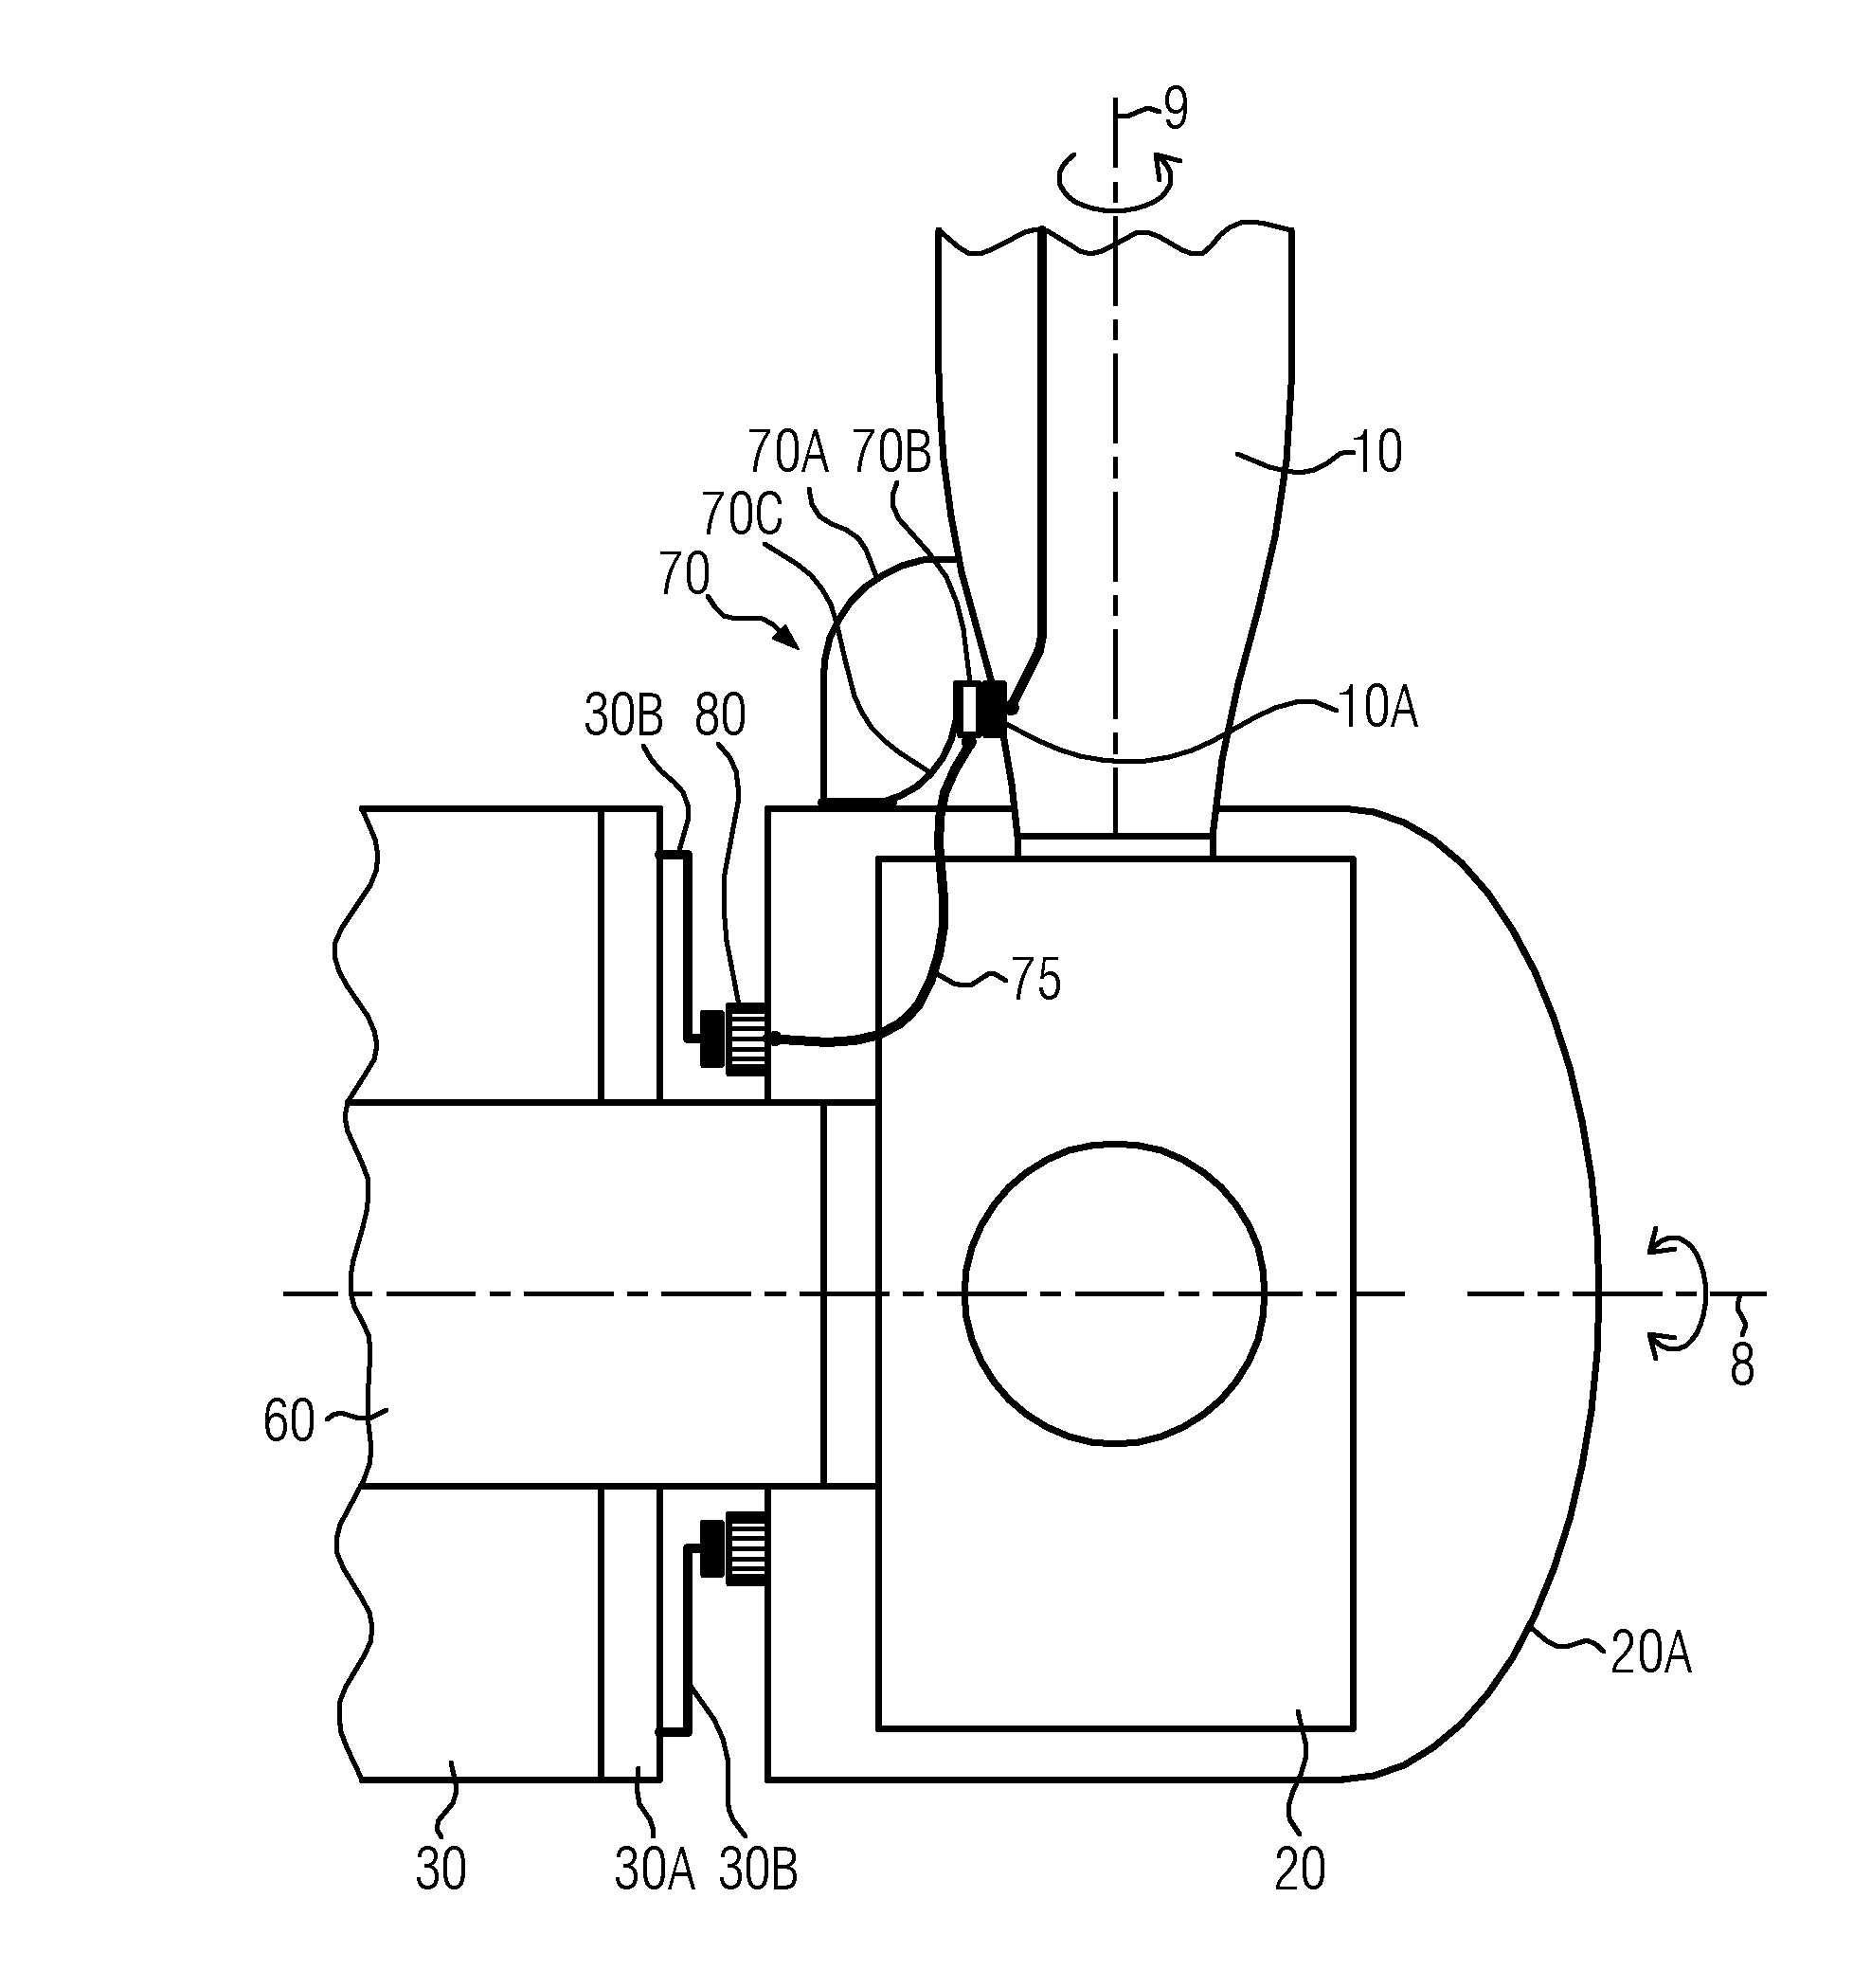 Lightning current transfer system and wind turbine using the lightning current transfer system